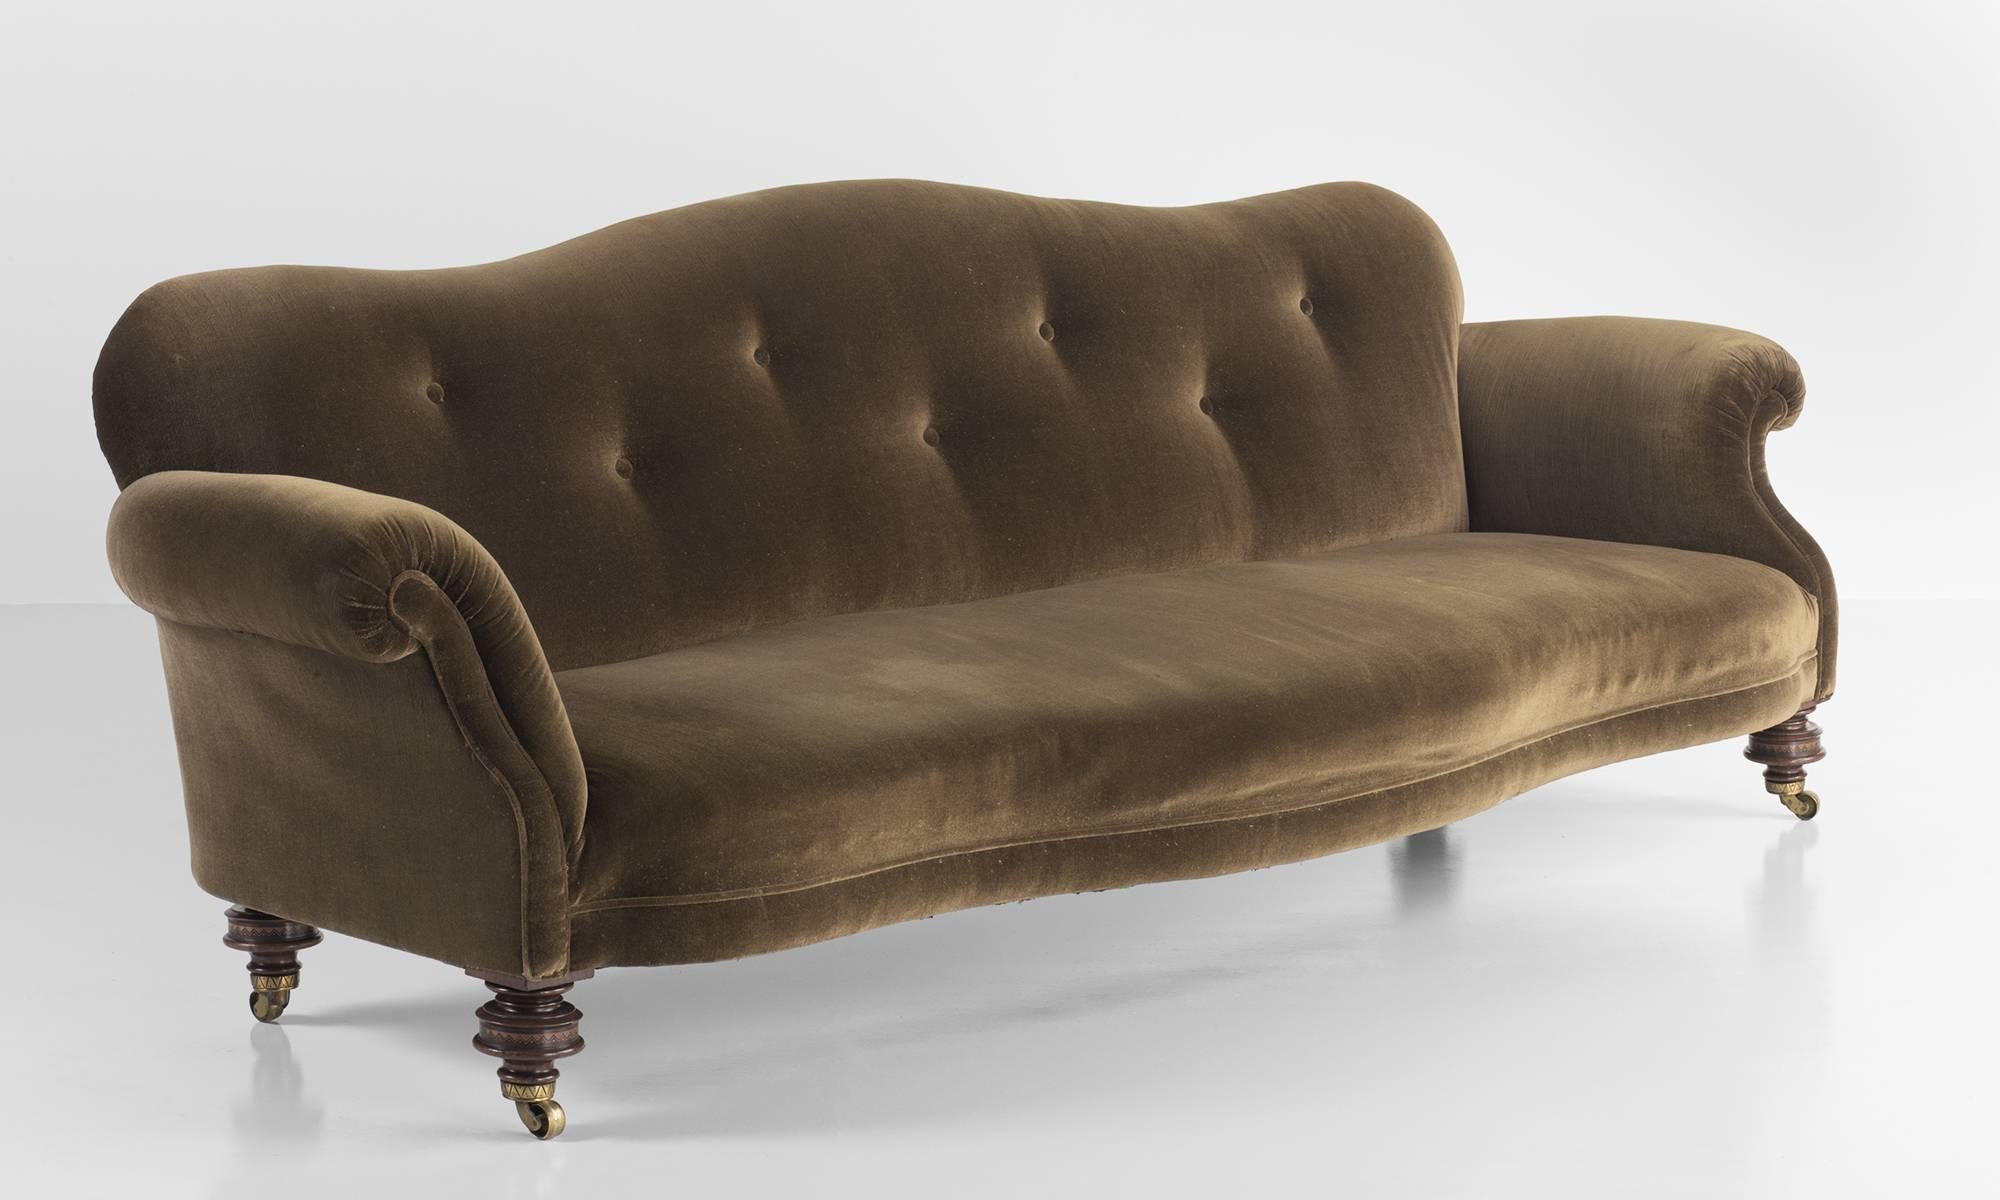 Victorian velvet and Mahogany sofa, circa 1890.

Grand scale country house sofa with original velvet upholstery and turned mahogany legs. With brass castors.

Originally purchased from an estate in Suffolk.